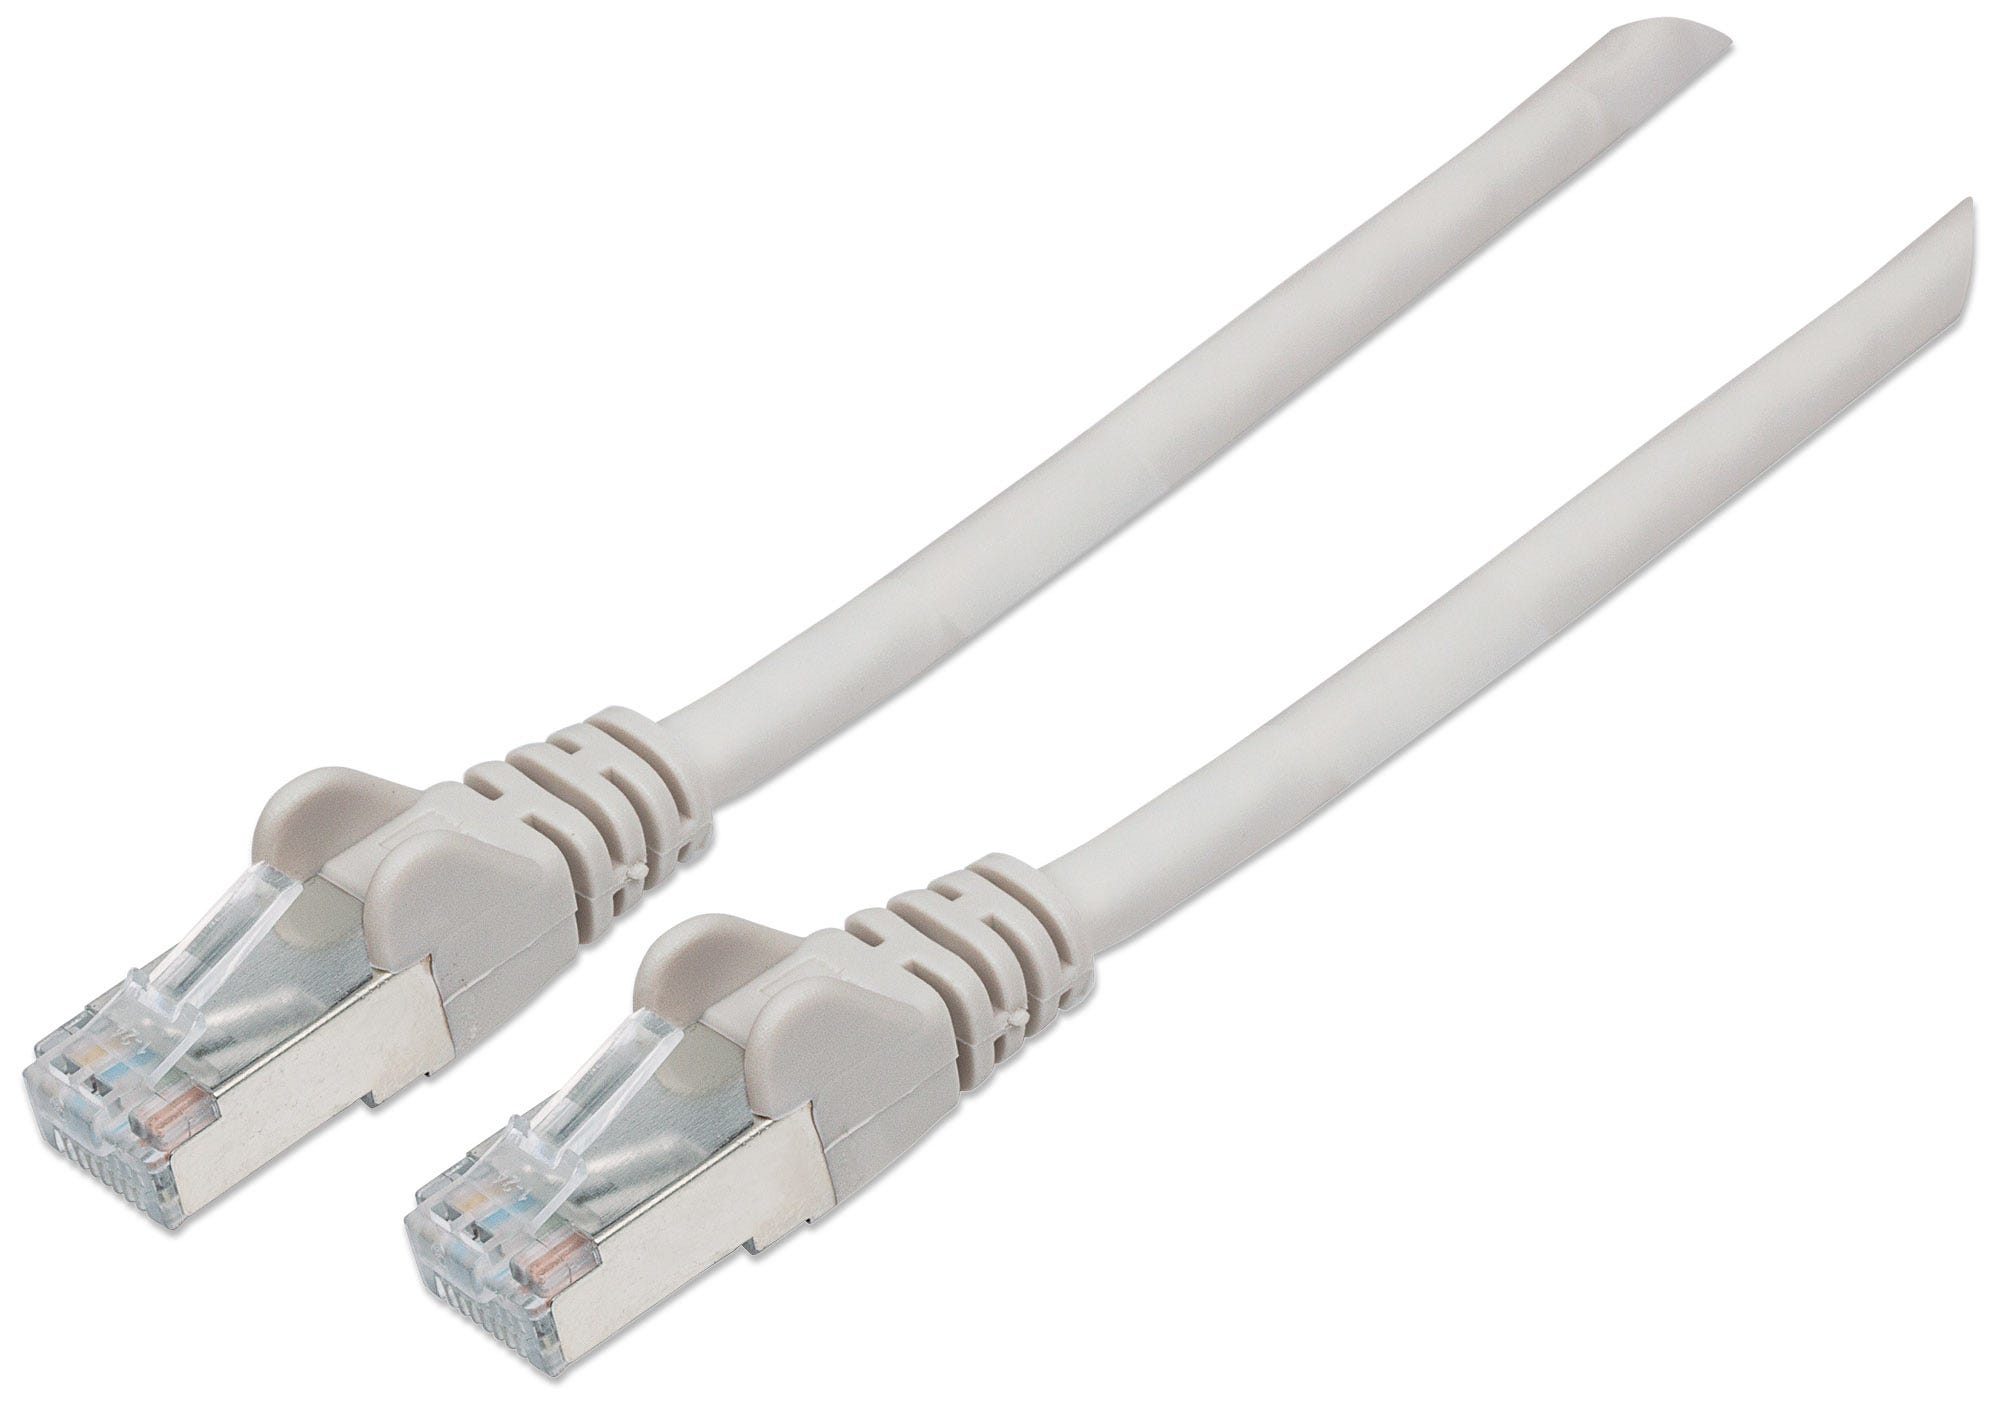 Intellinet Network Patch Cable, Cat6, 1m, Grey, Copper, S/FTP, LSOH / LSZH, PVC, RJ45, Gold Plated Contacts, Snagless, Booted, Polybag - Patch-Kabel - RJ-45 (M)